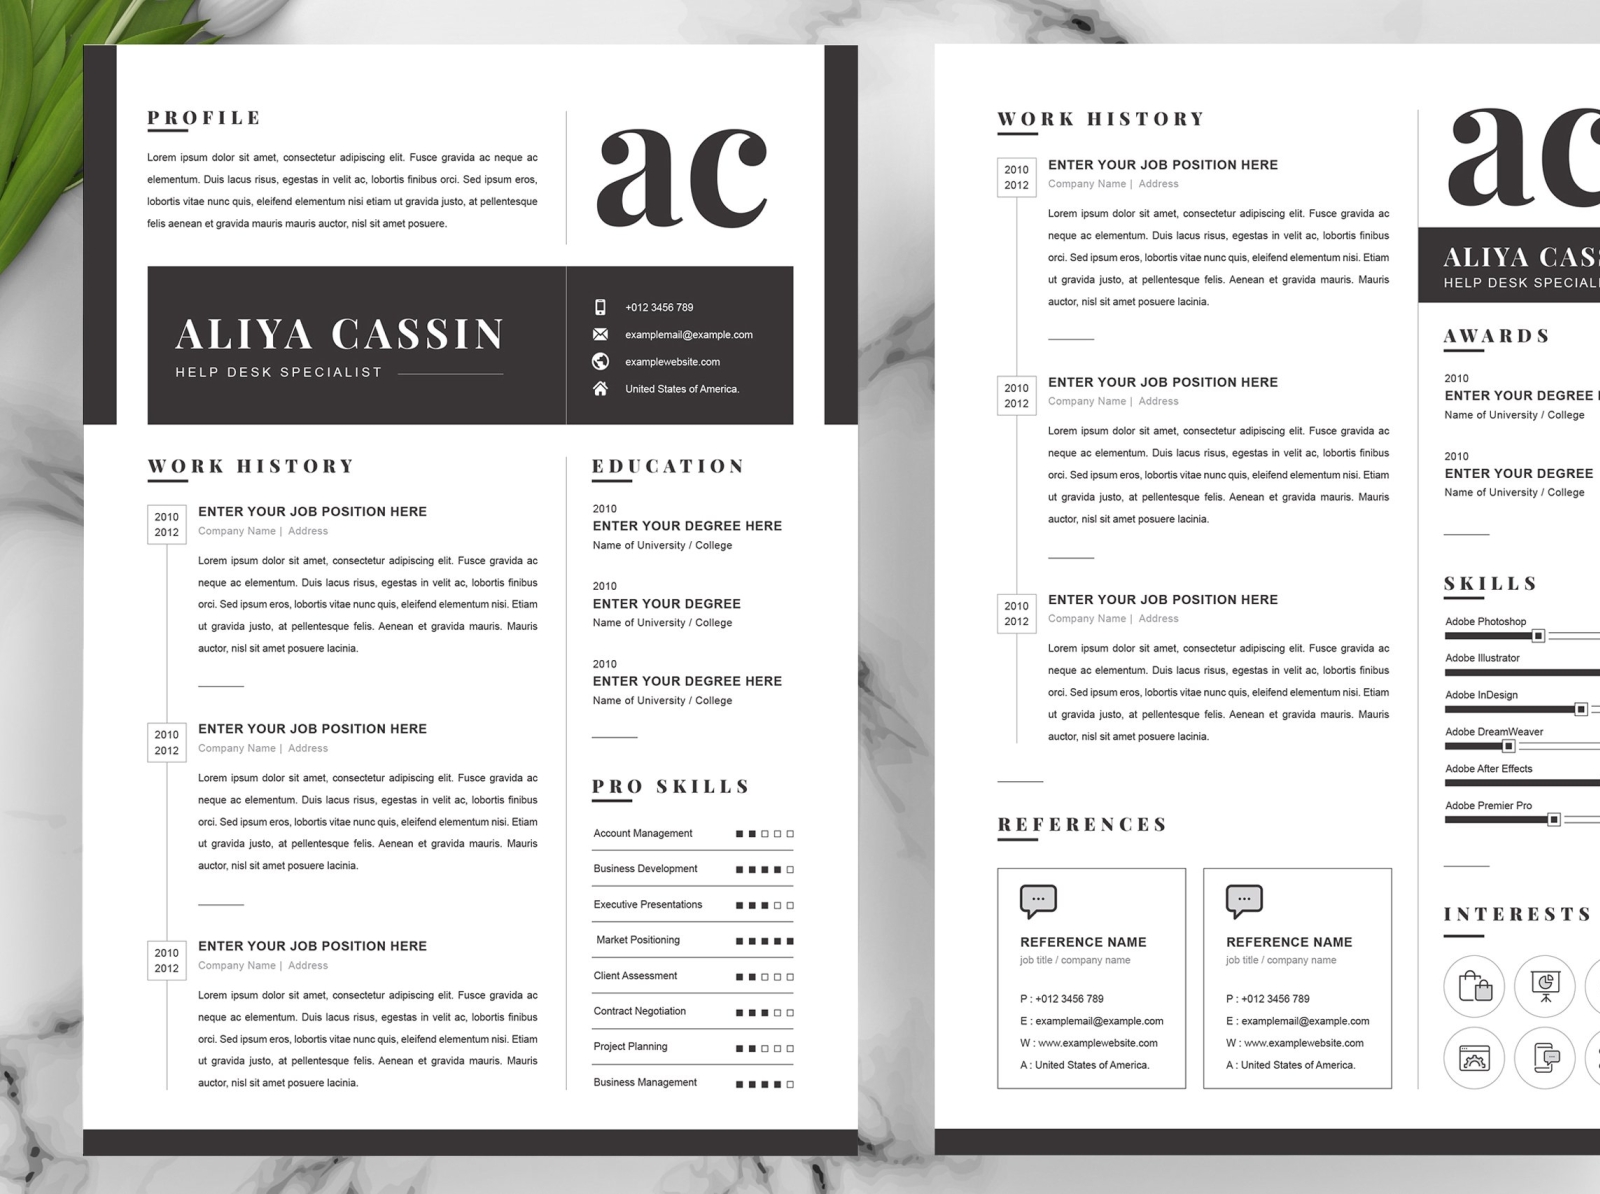 Minimal and Black White Clean Resume / CV Template by Resume Templates